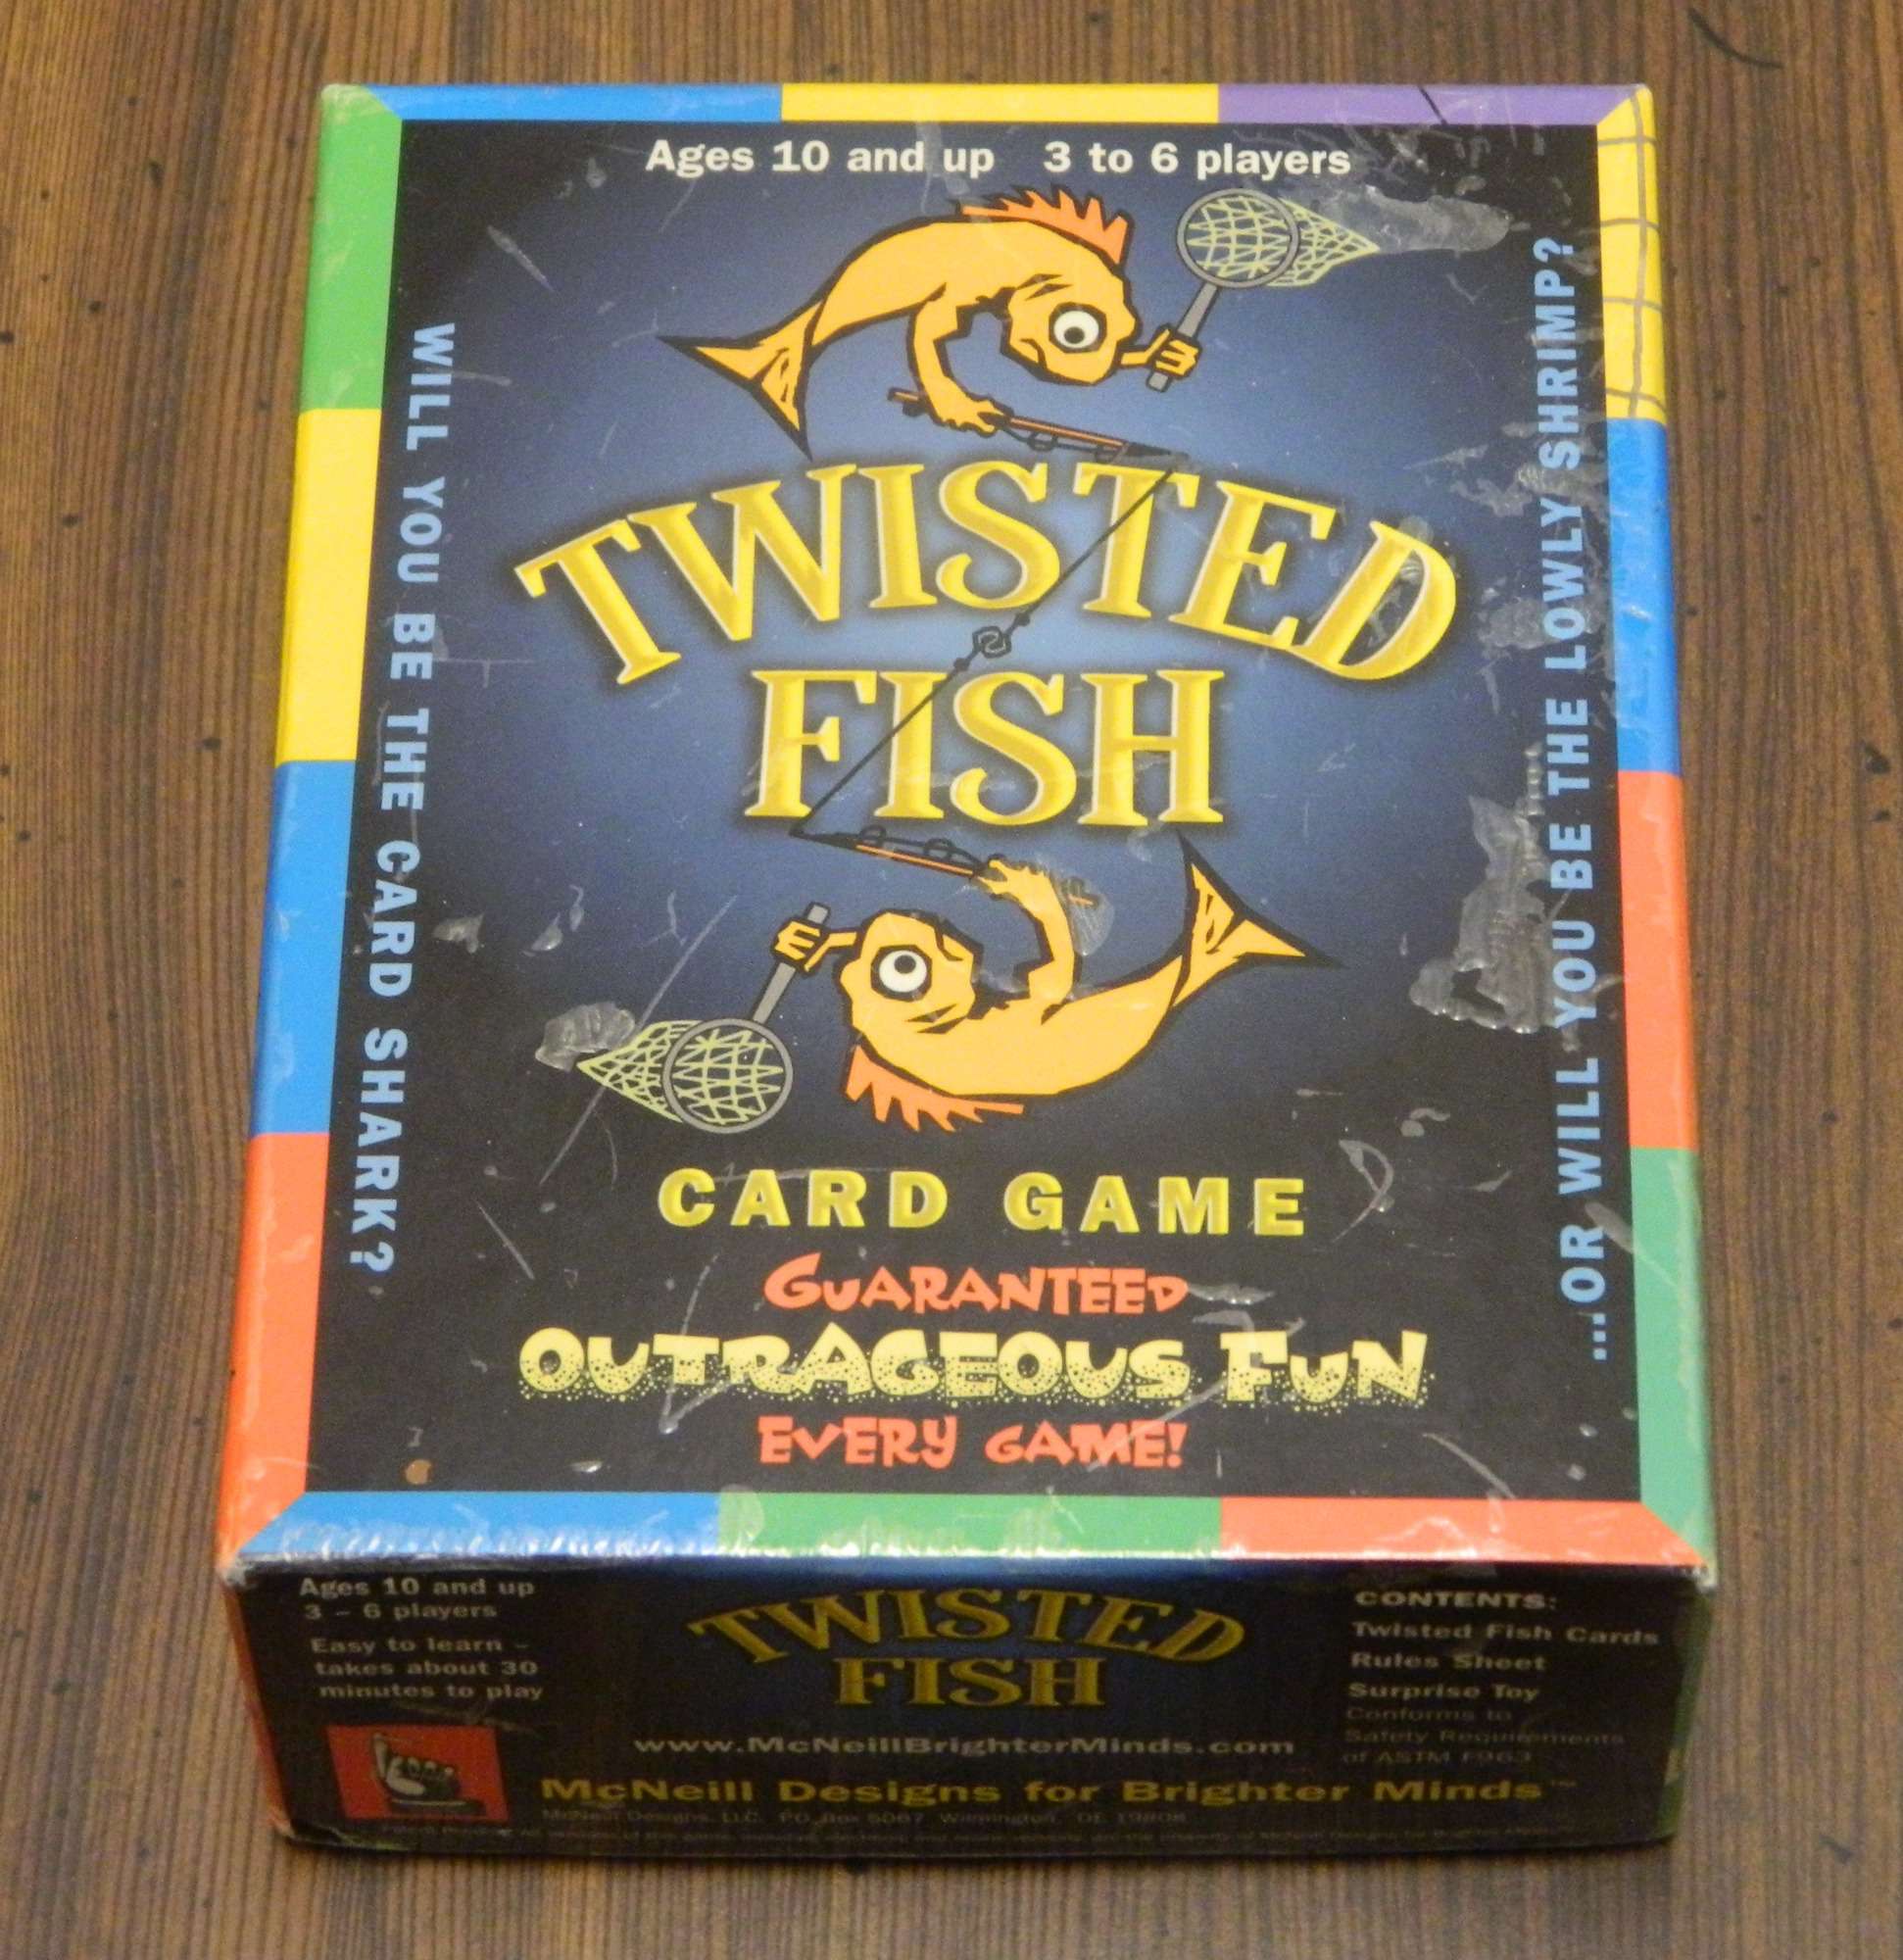 Twisted Fish Card Game Box